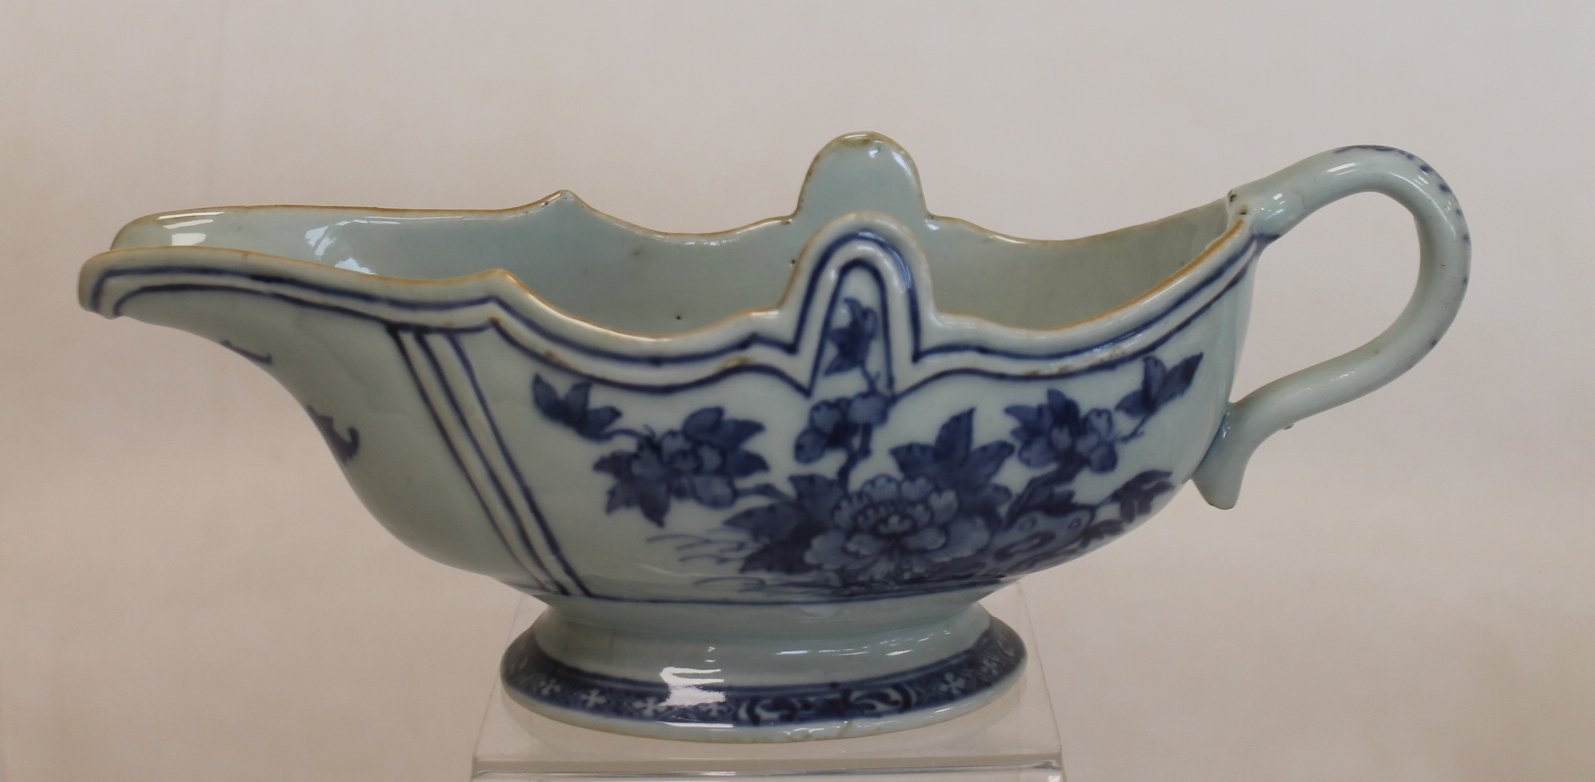 Pair of 18th century Chinese Export blue & white porcelain sauce boats, - Image 8 of 13